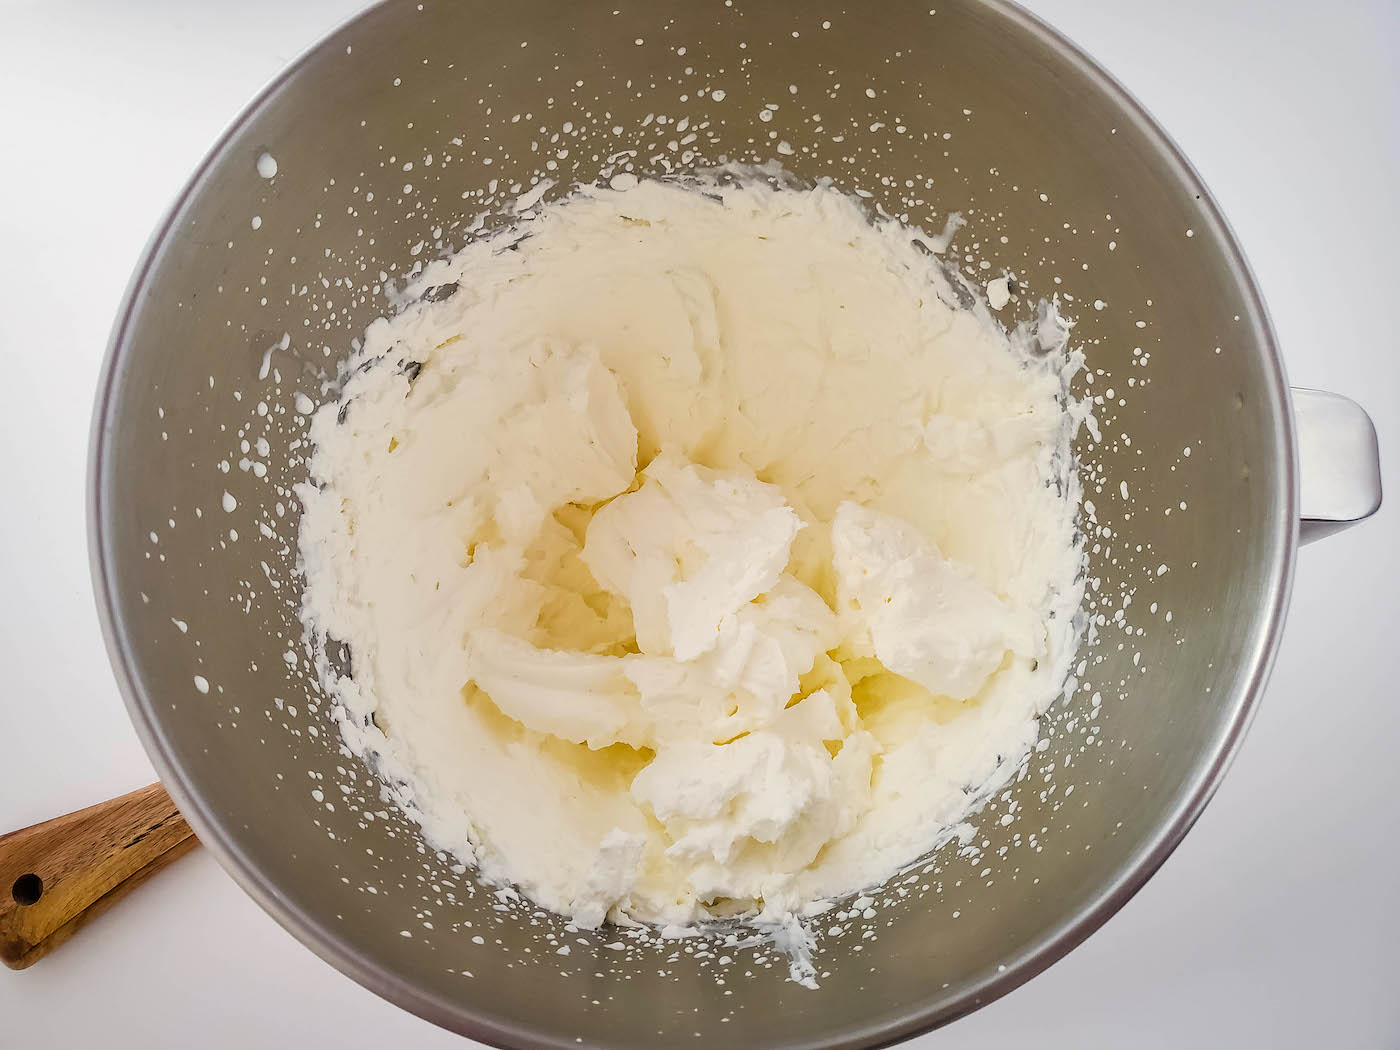 Whipping cream after beating for three minutes